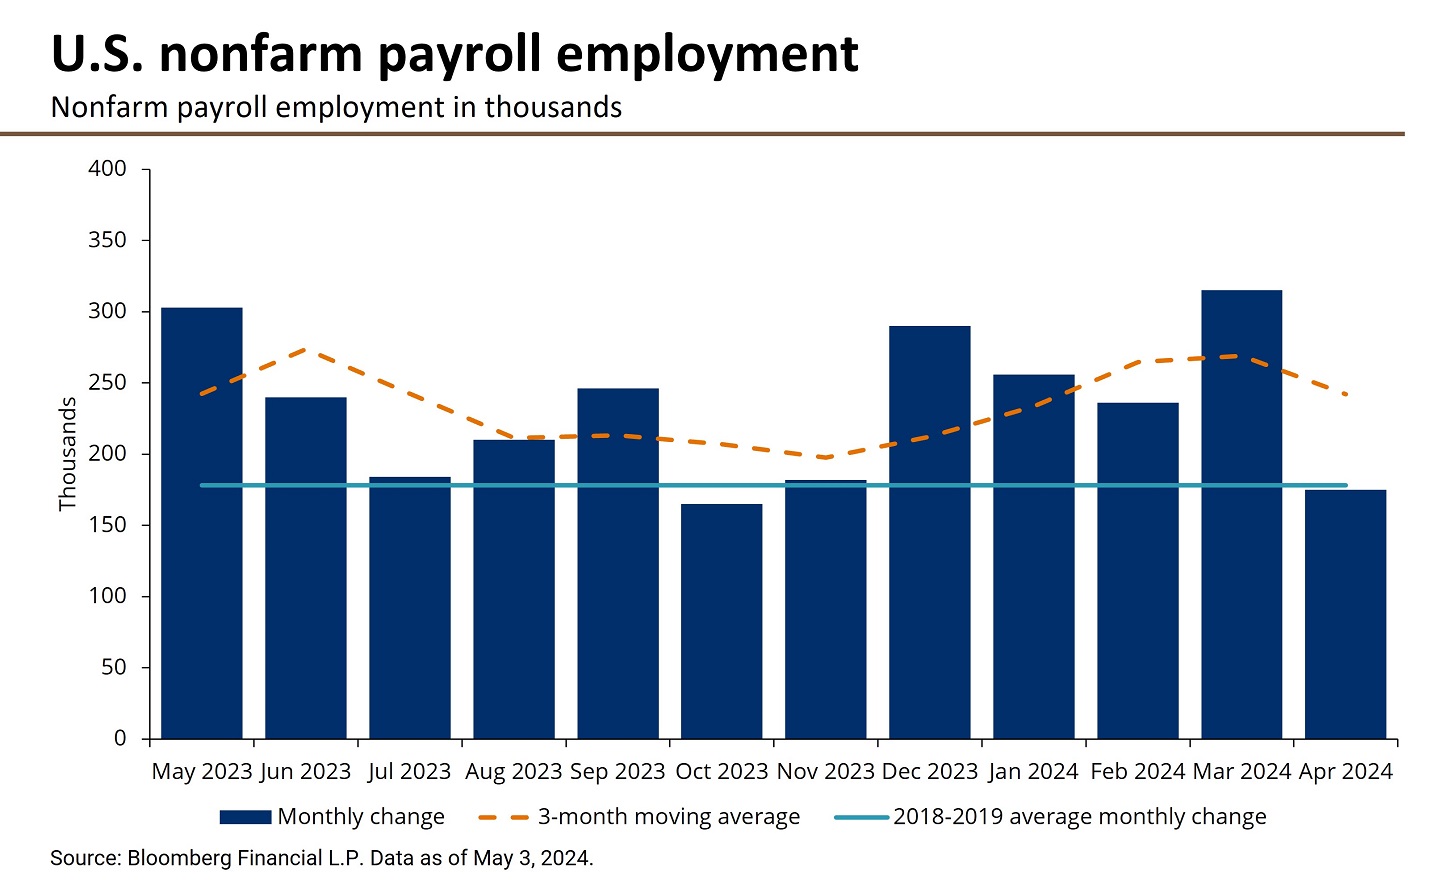 This chart shows the monthly nonfarm payroll employment change in thousands from May 2023 to April 2024. 